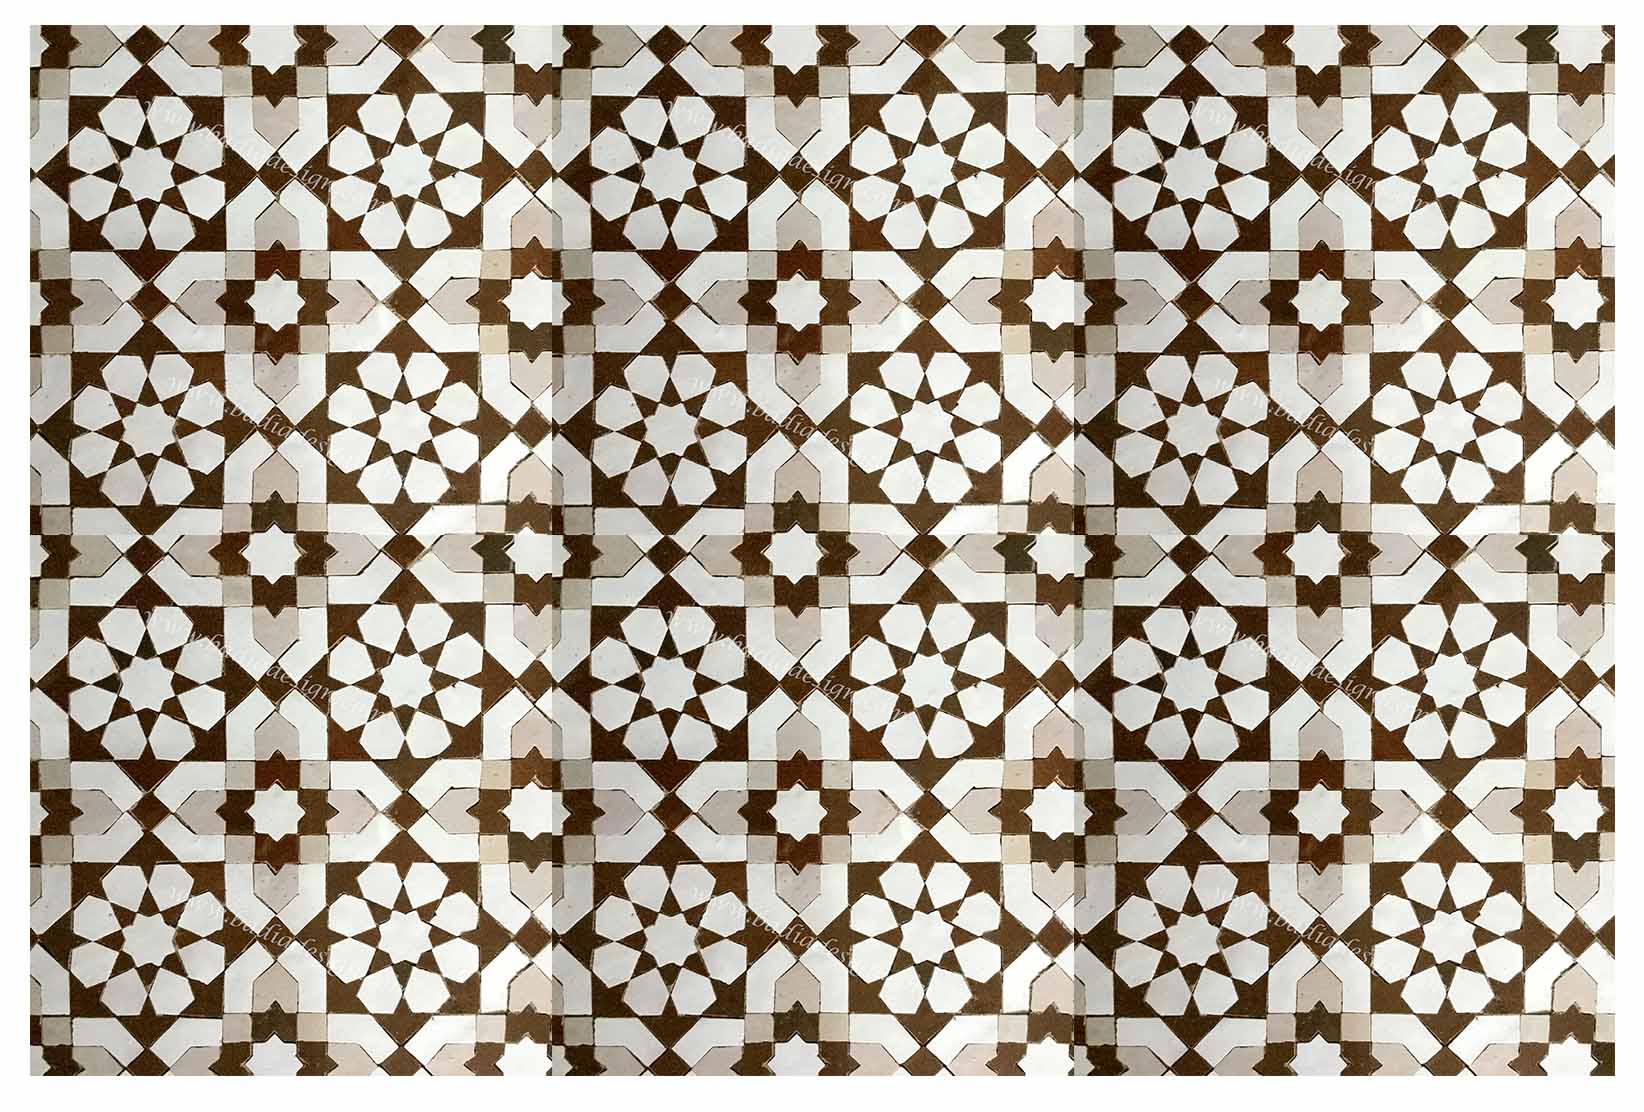 Moroccan Tile from Badia Design Inc.